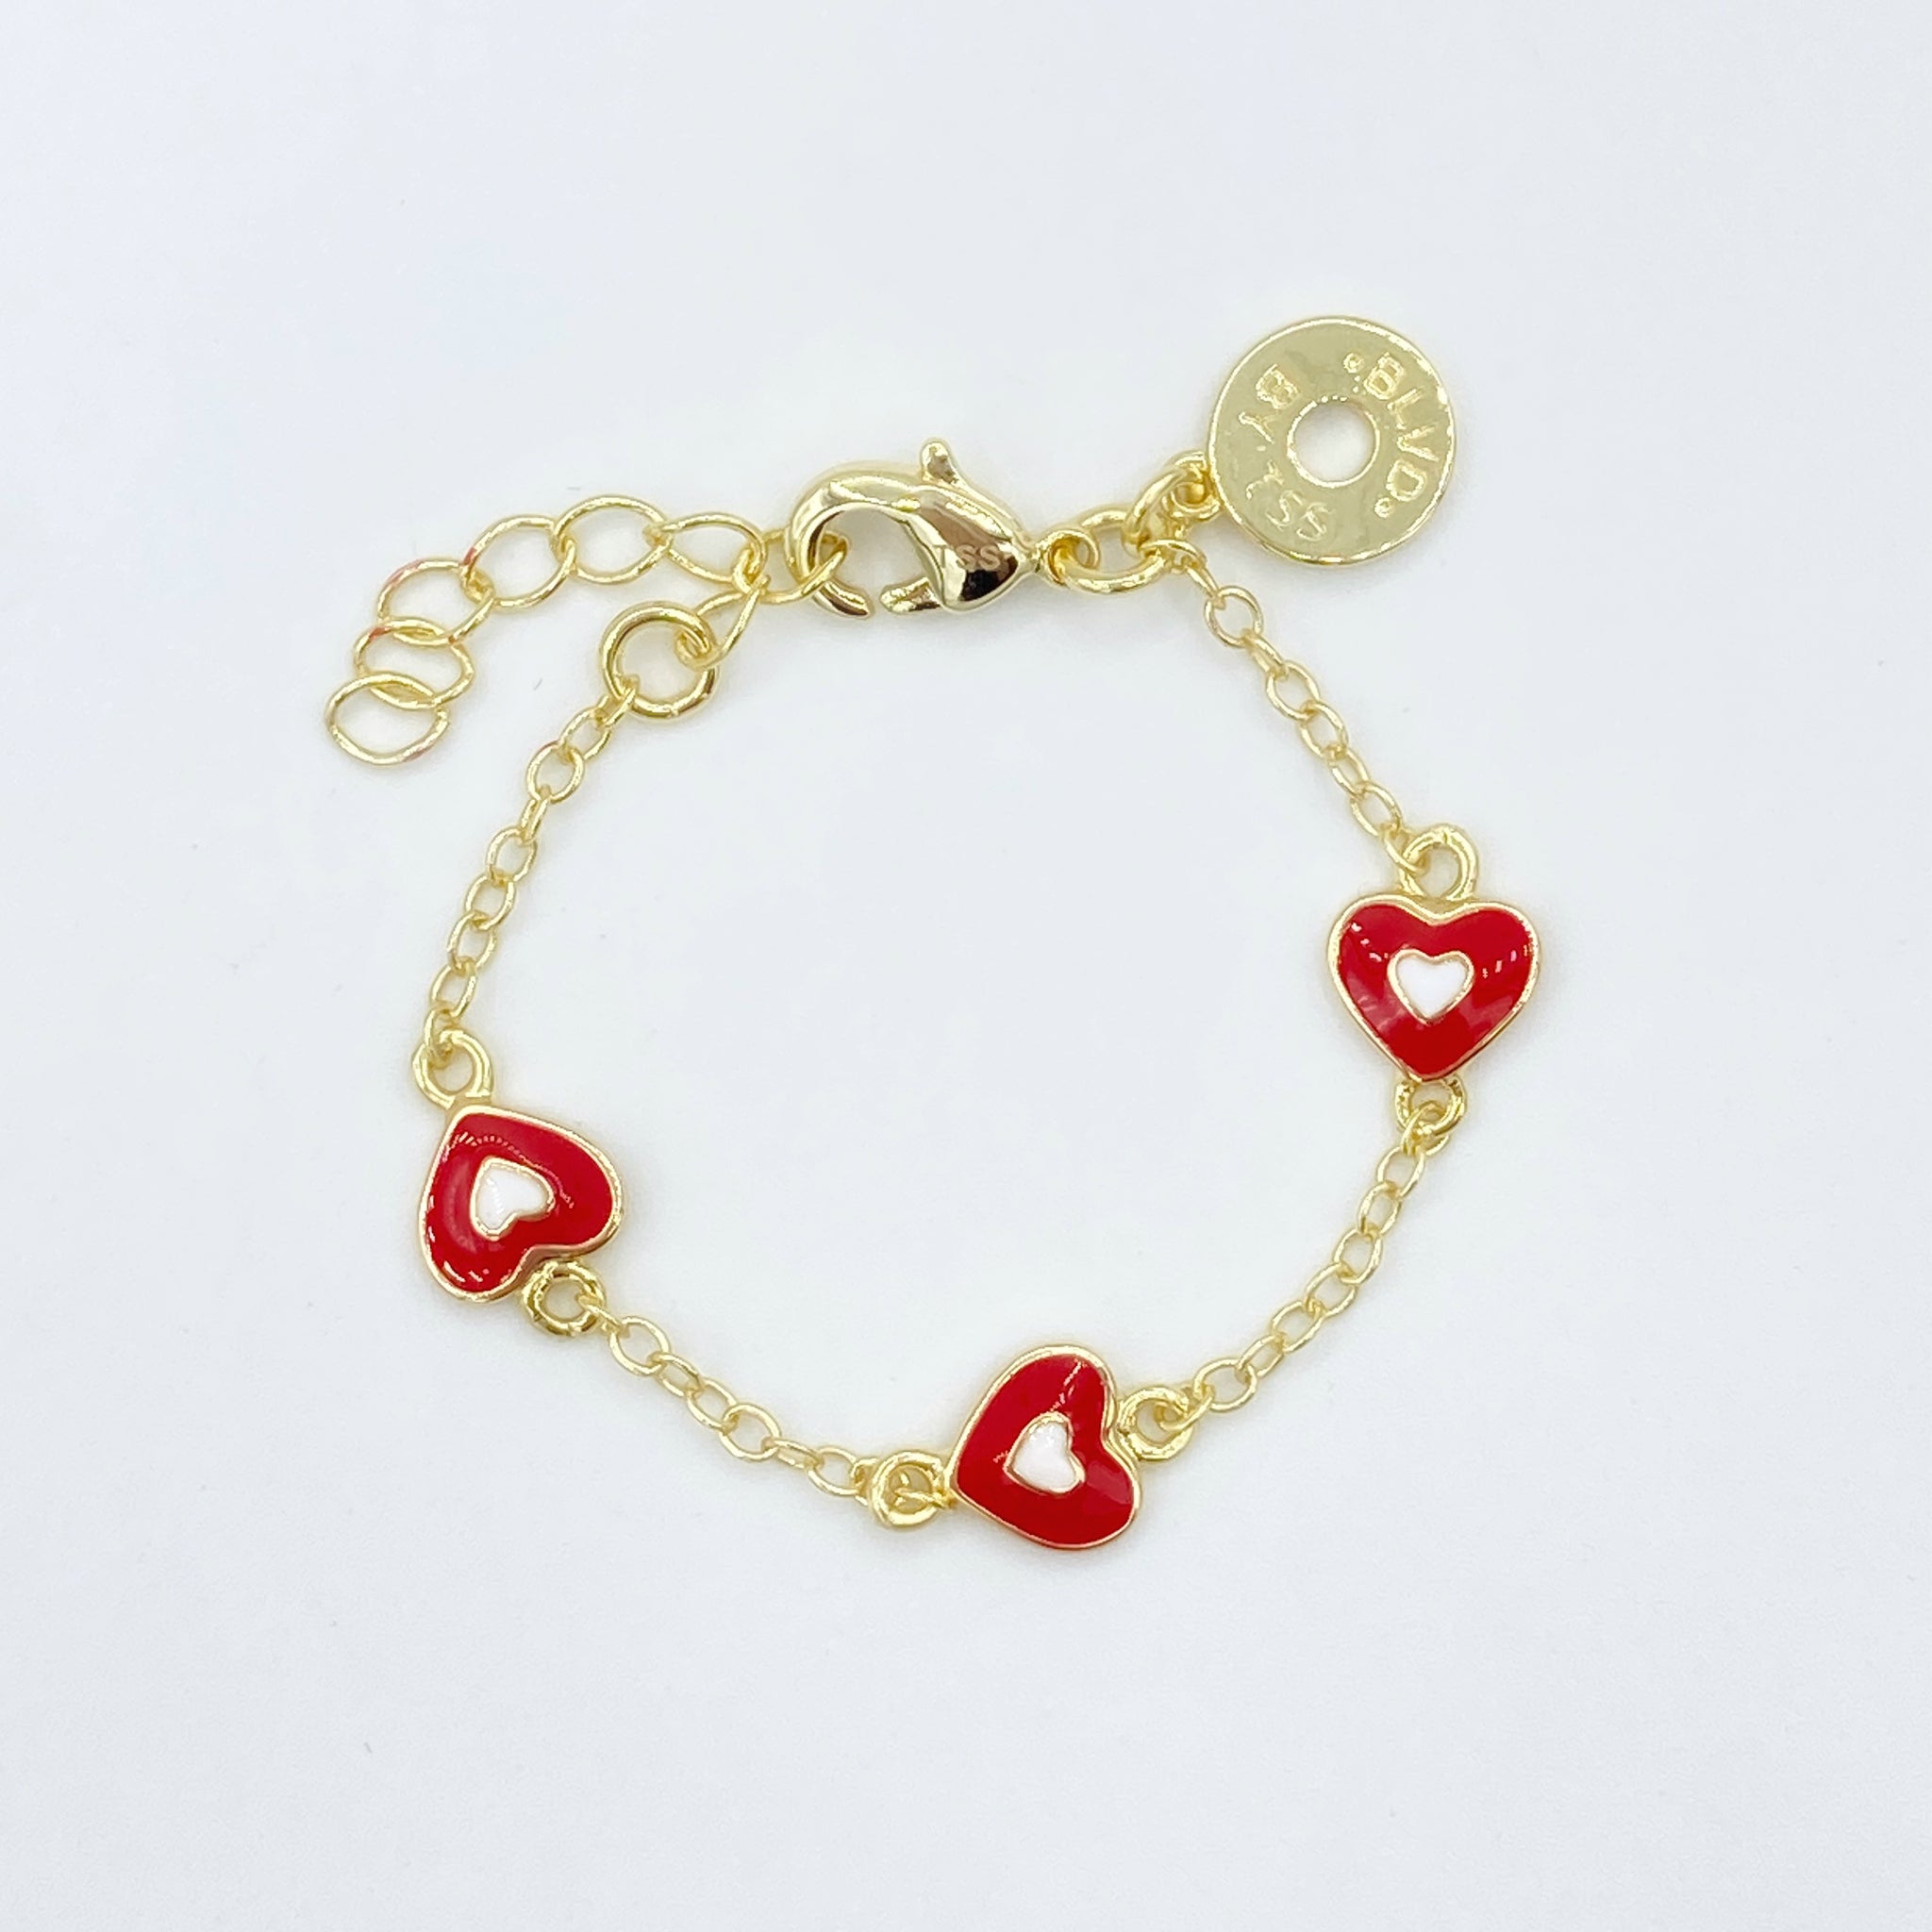 Hearts and Bells Baby Charm Bracelet for babies and toddlers